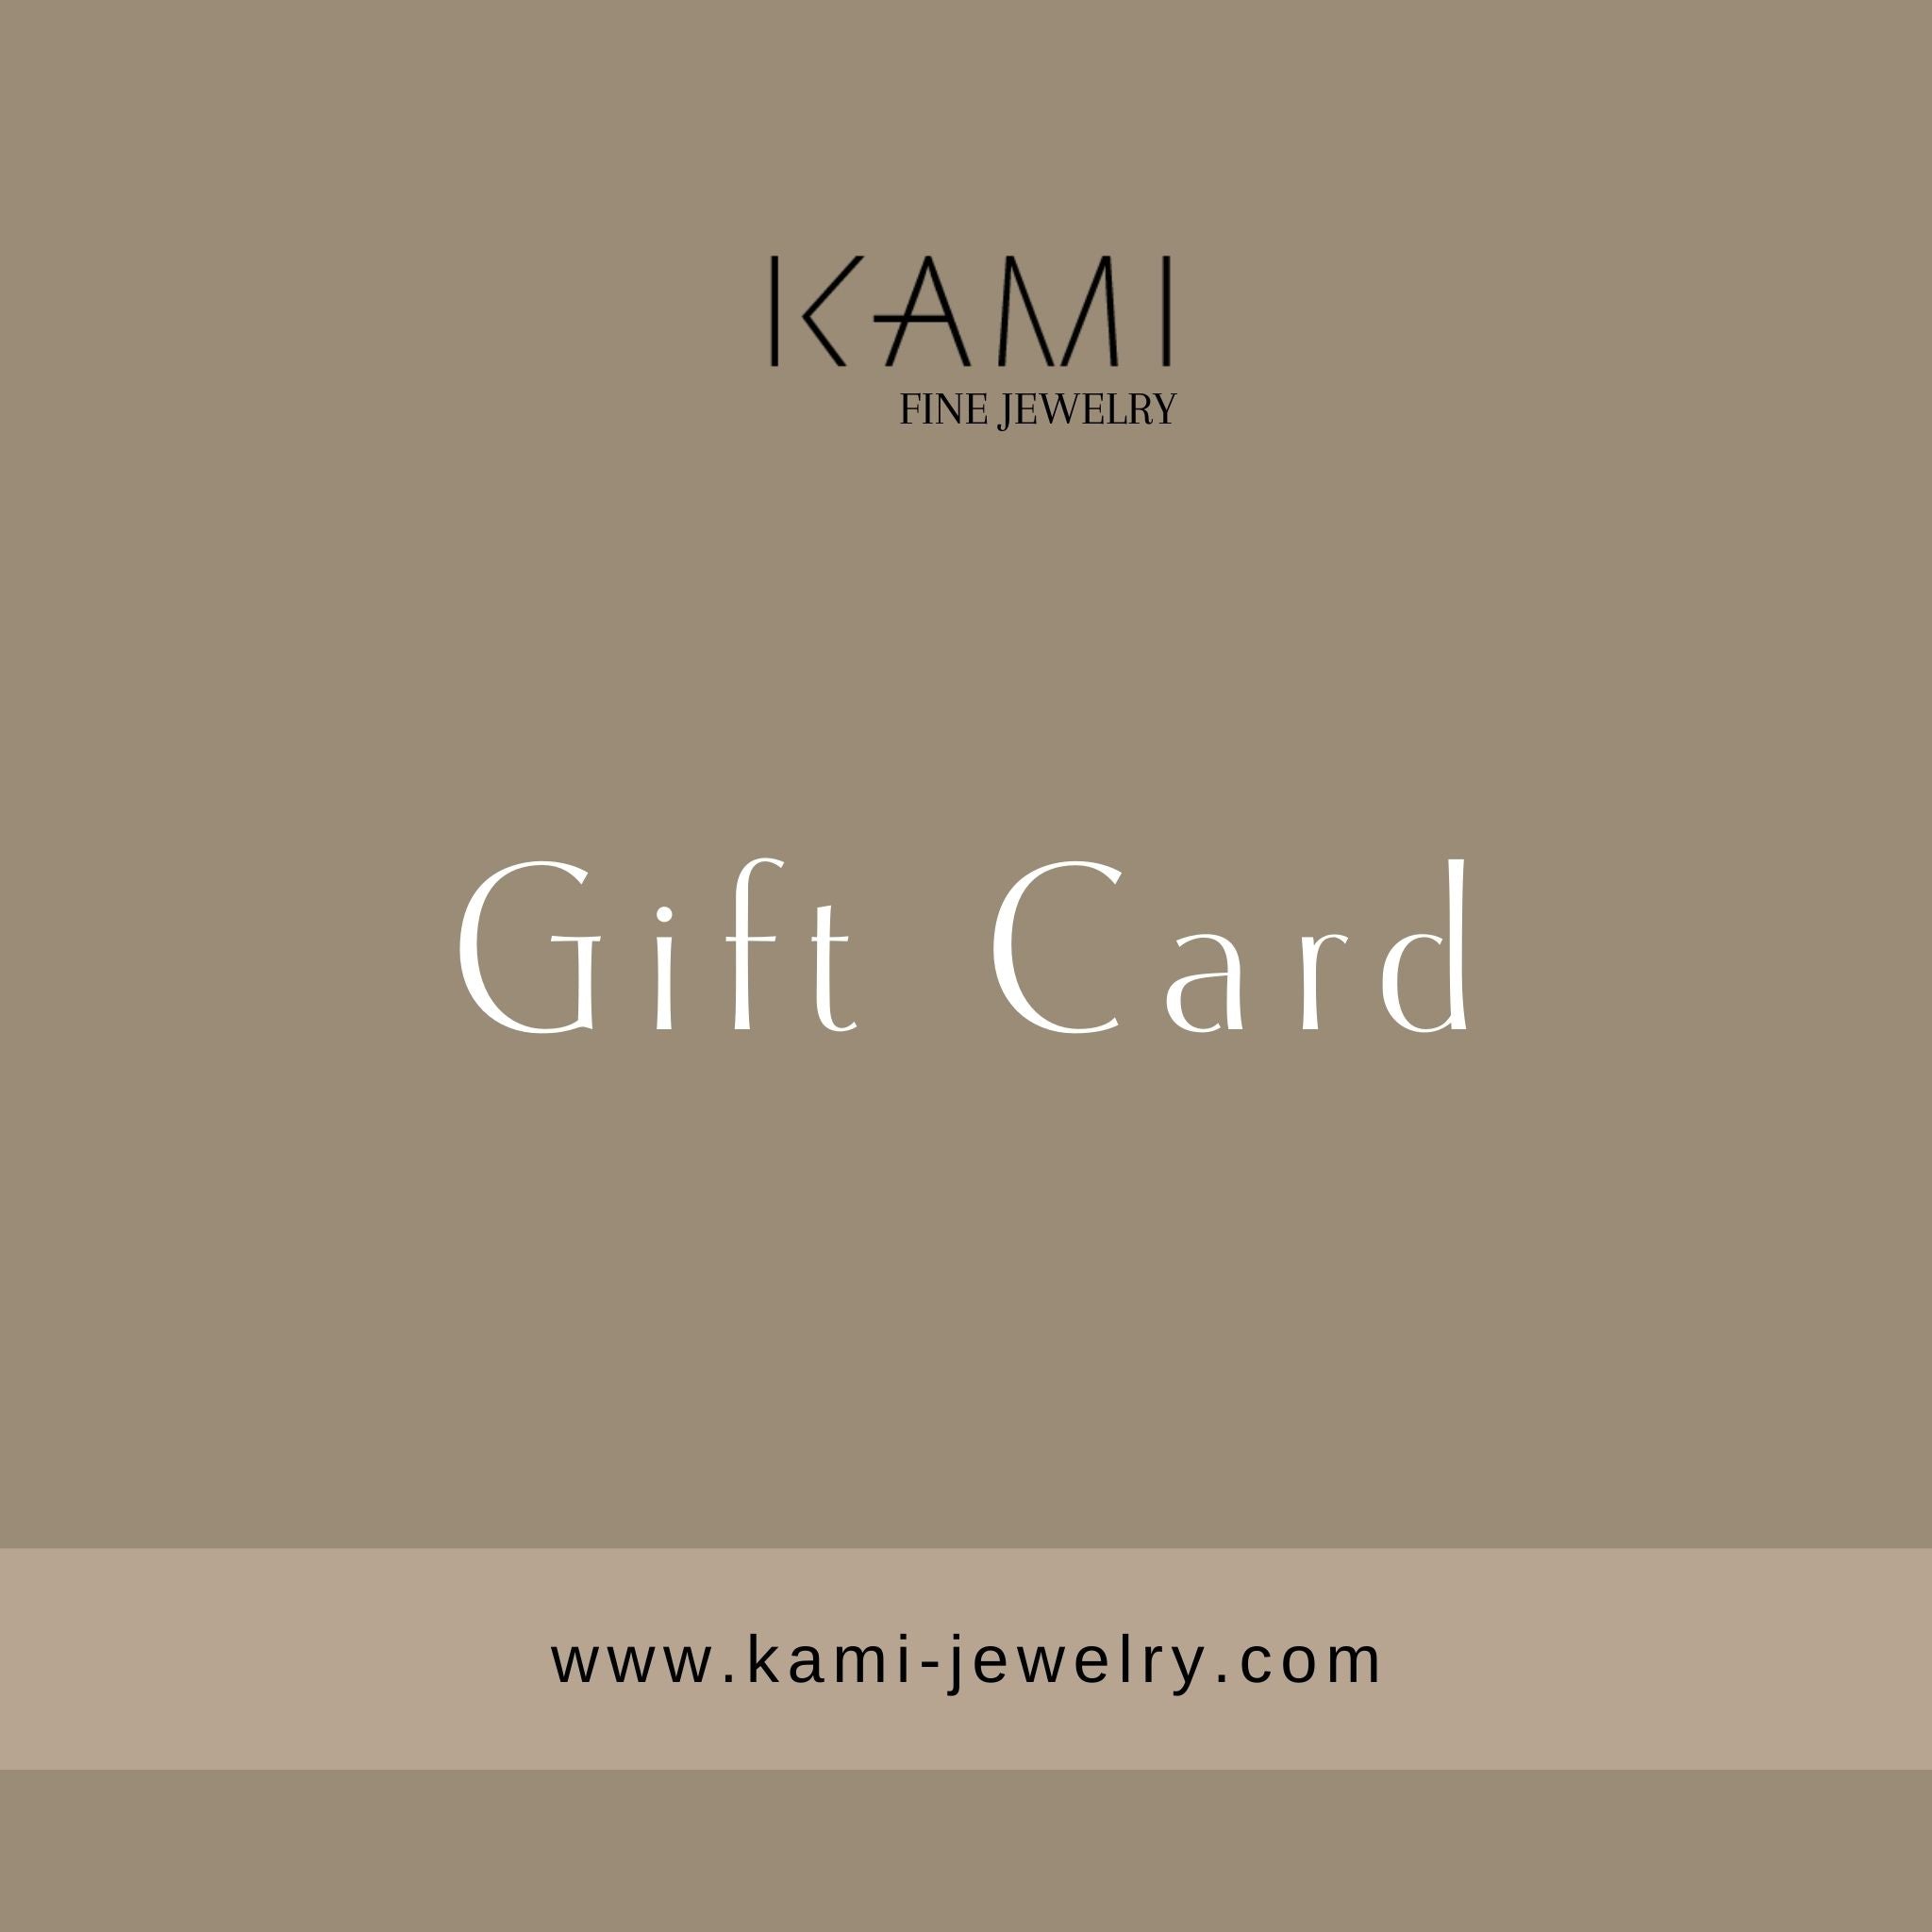 Kami-Jewelry Gift Card: The Perfect Gift for Any Jewelry Lover